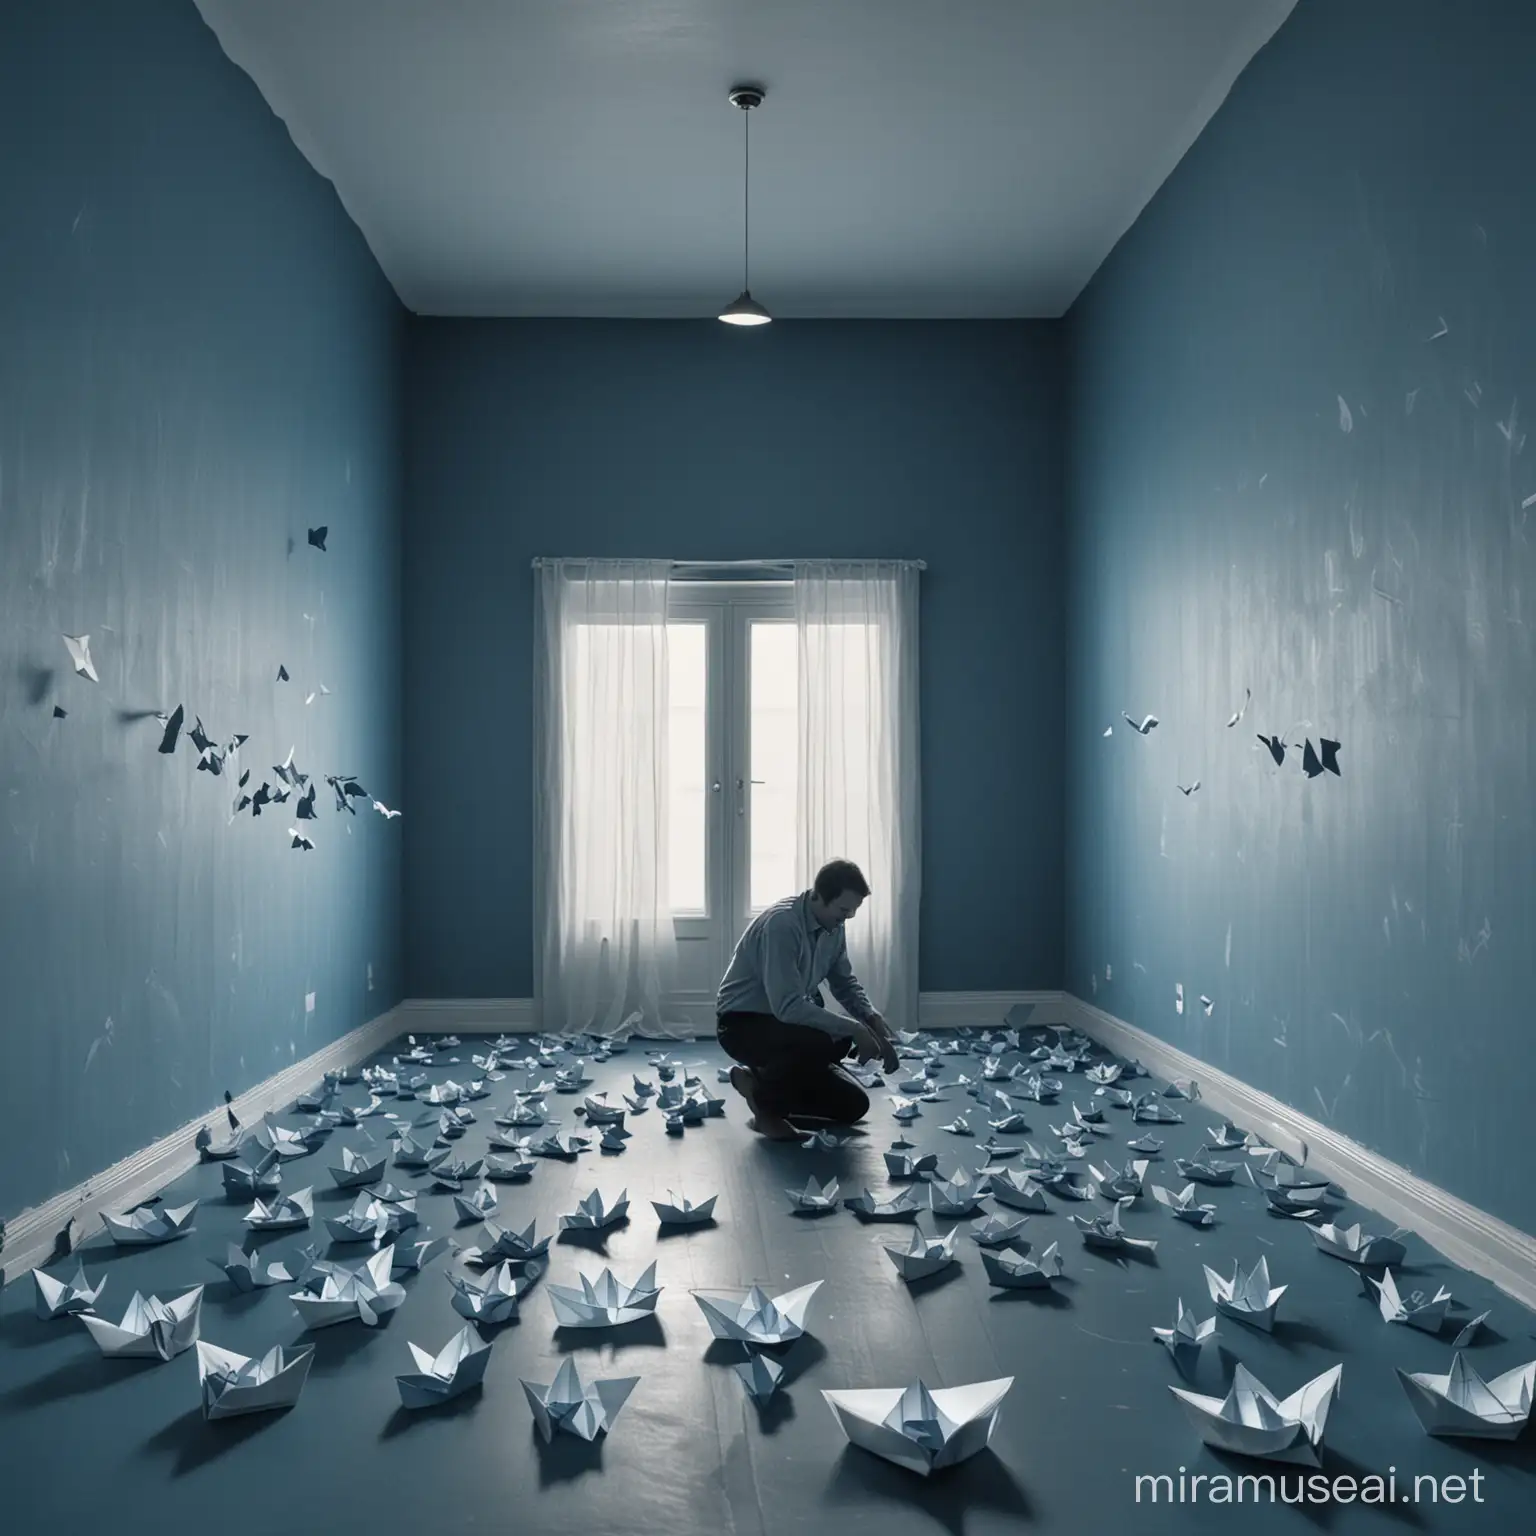 A man alone in a shadowless blue room holding a toy boat and all the paper boats on the floor.